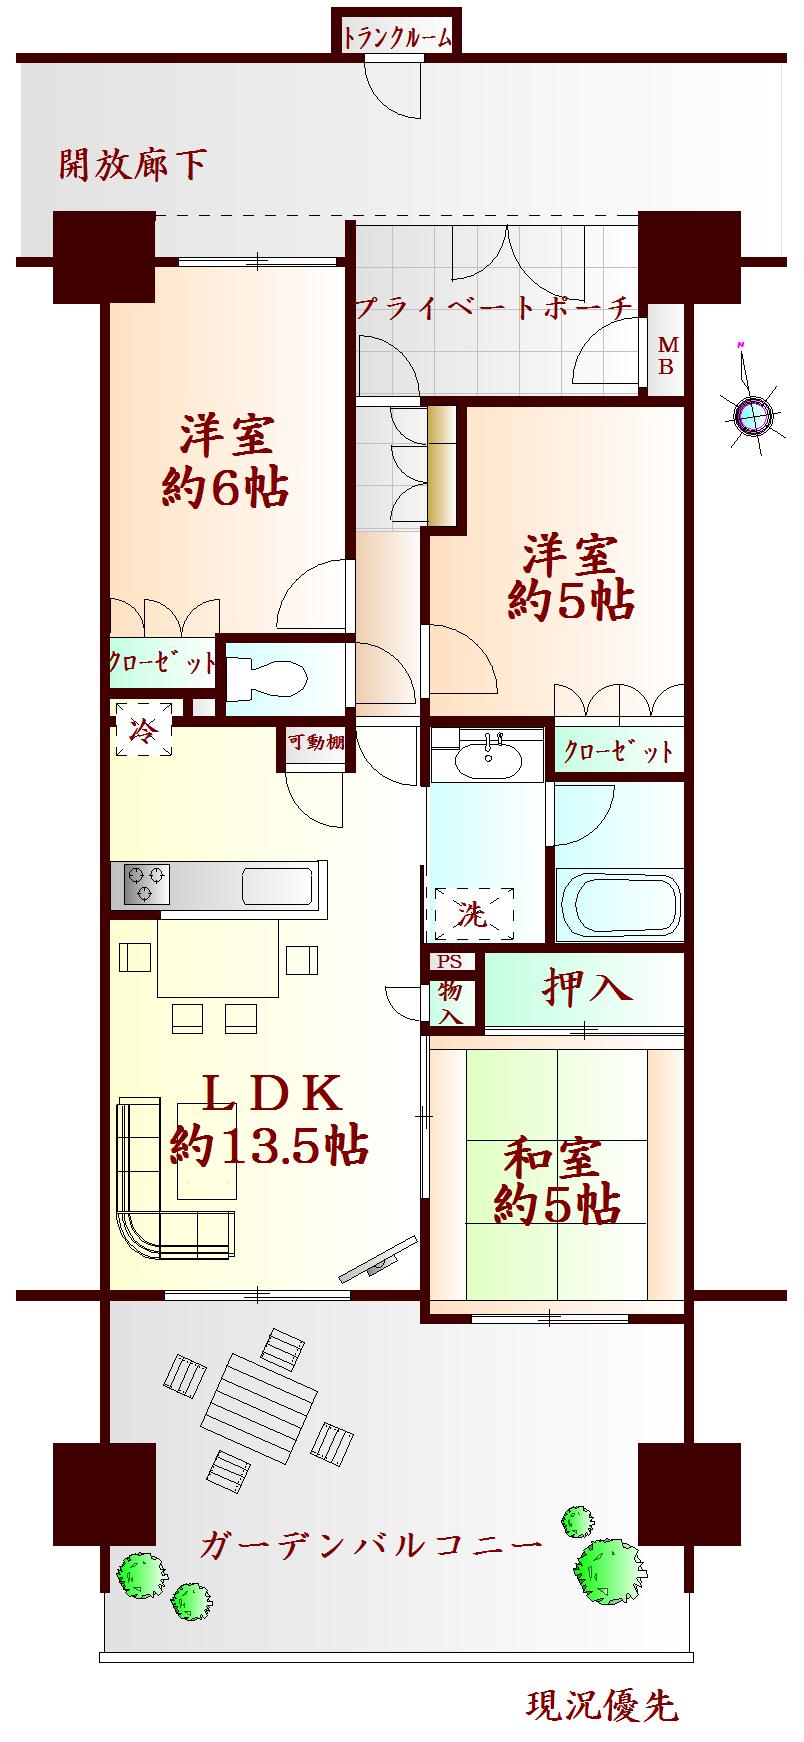 Floor plan. 3LDK, Price 19,800,000 yen, Occupied area 63.71 sq m , Balcony area 24.22 sq m   ※ If the Matrix and the present situation is different, I will consider it as present condition priority ※